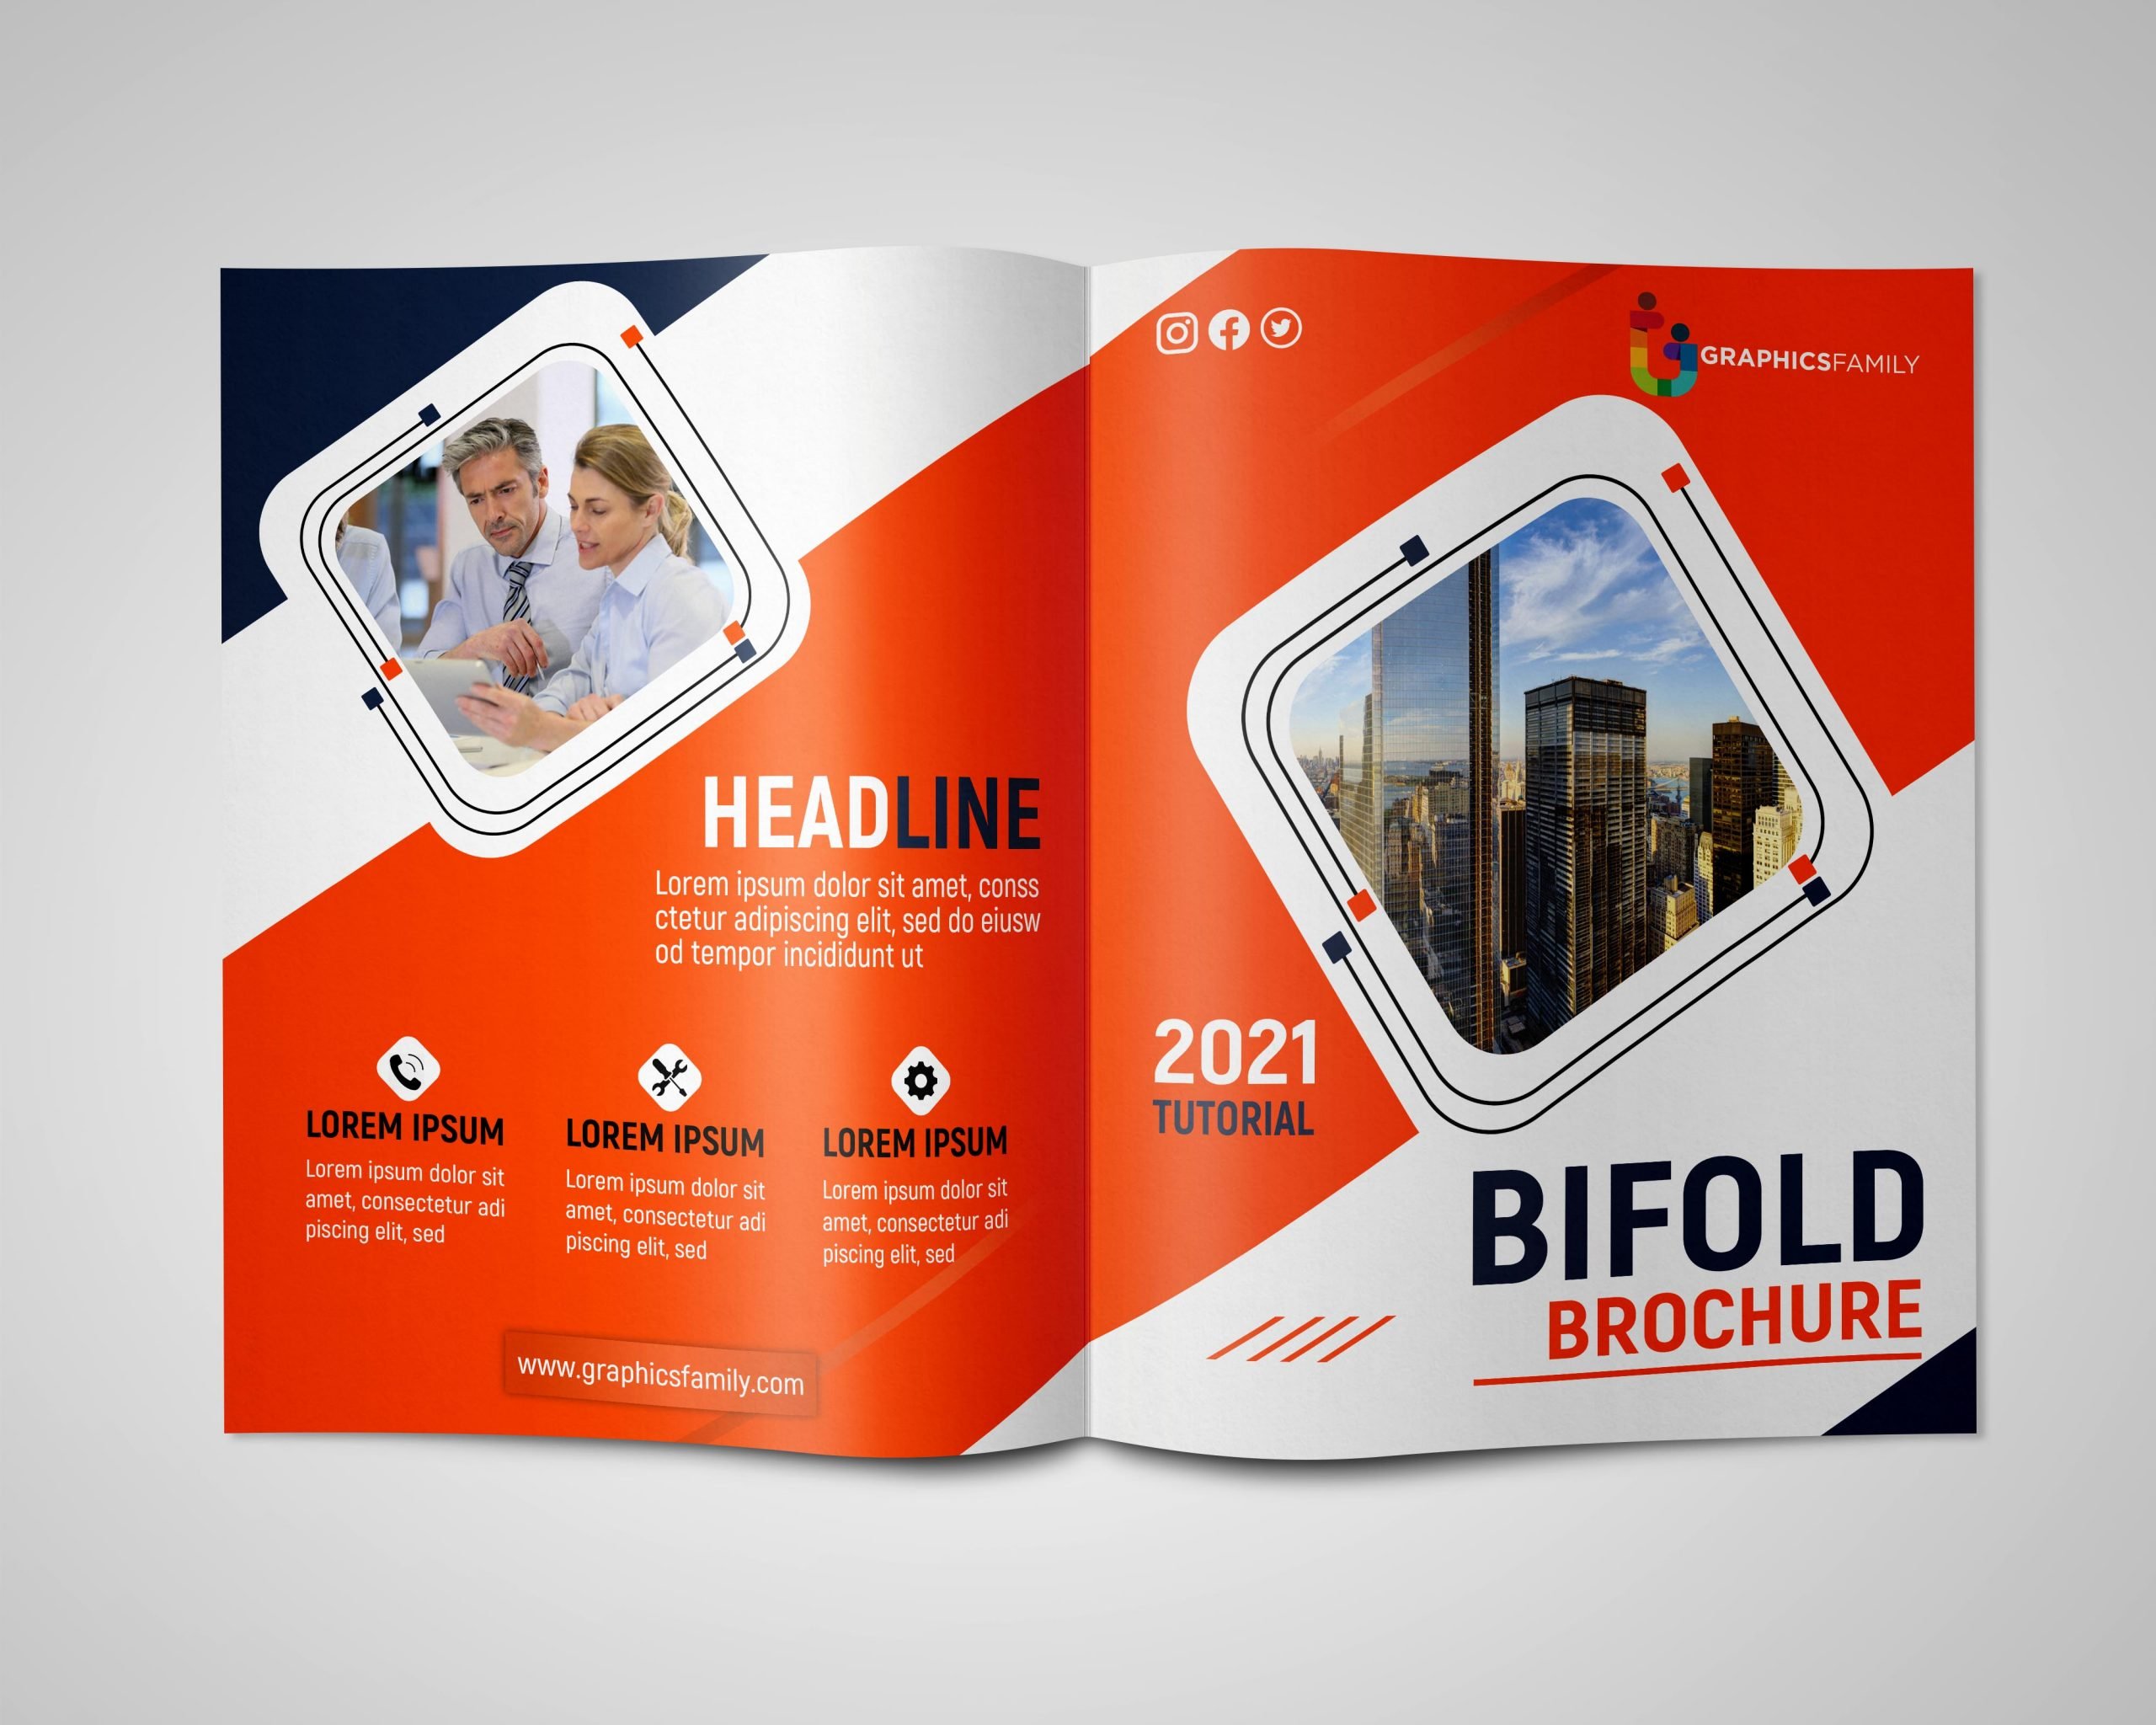 Free Simple Bifold Brochure Design for GraphicsFamily